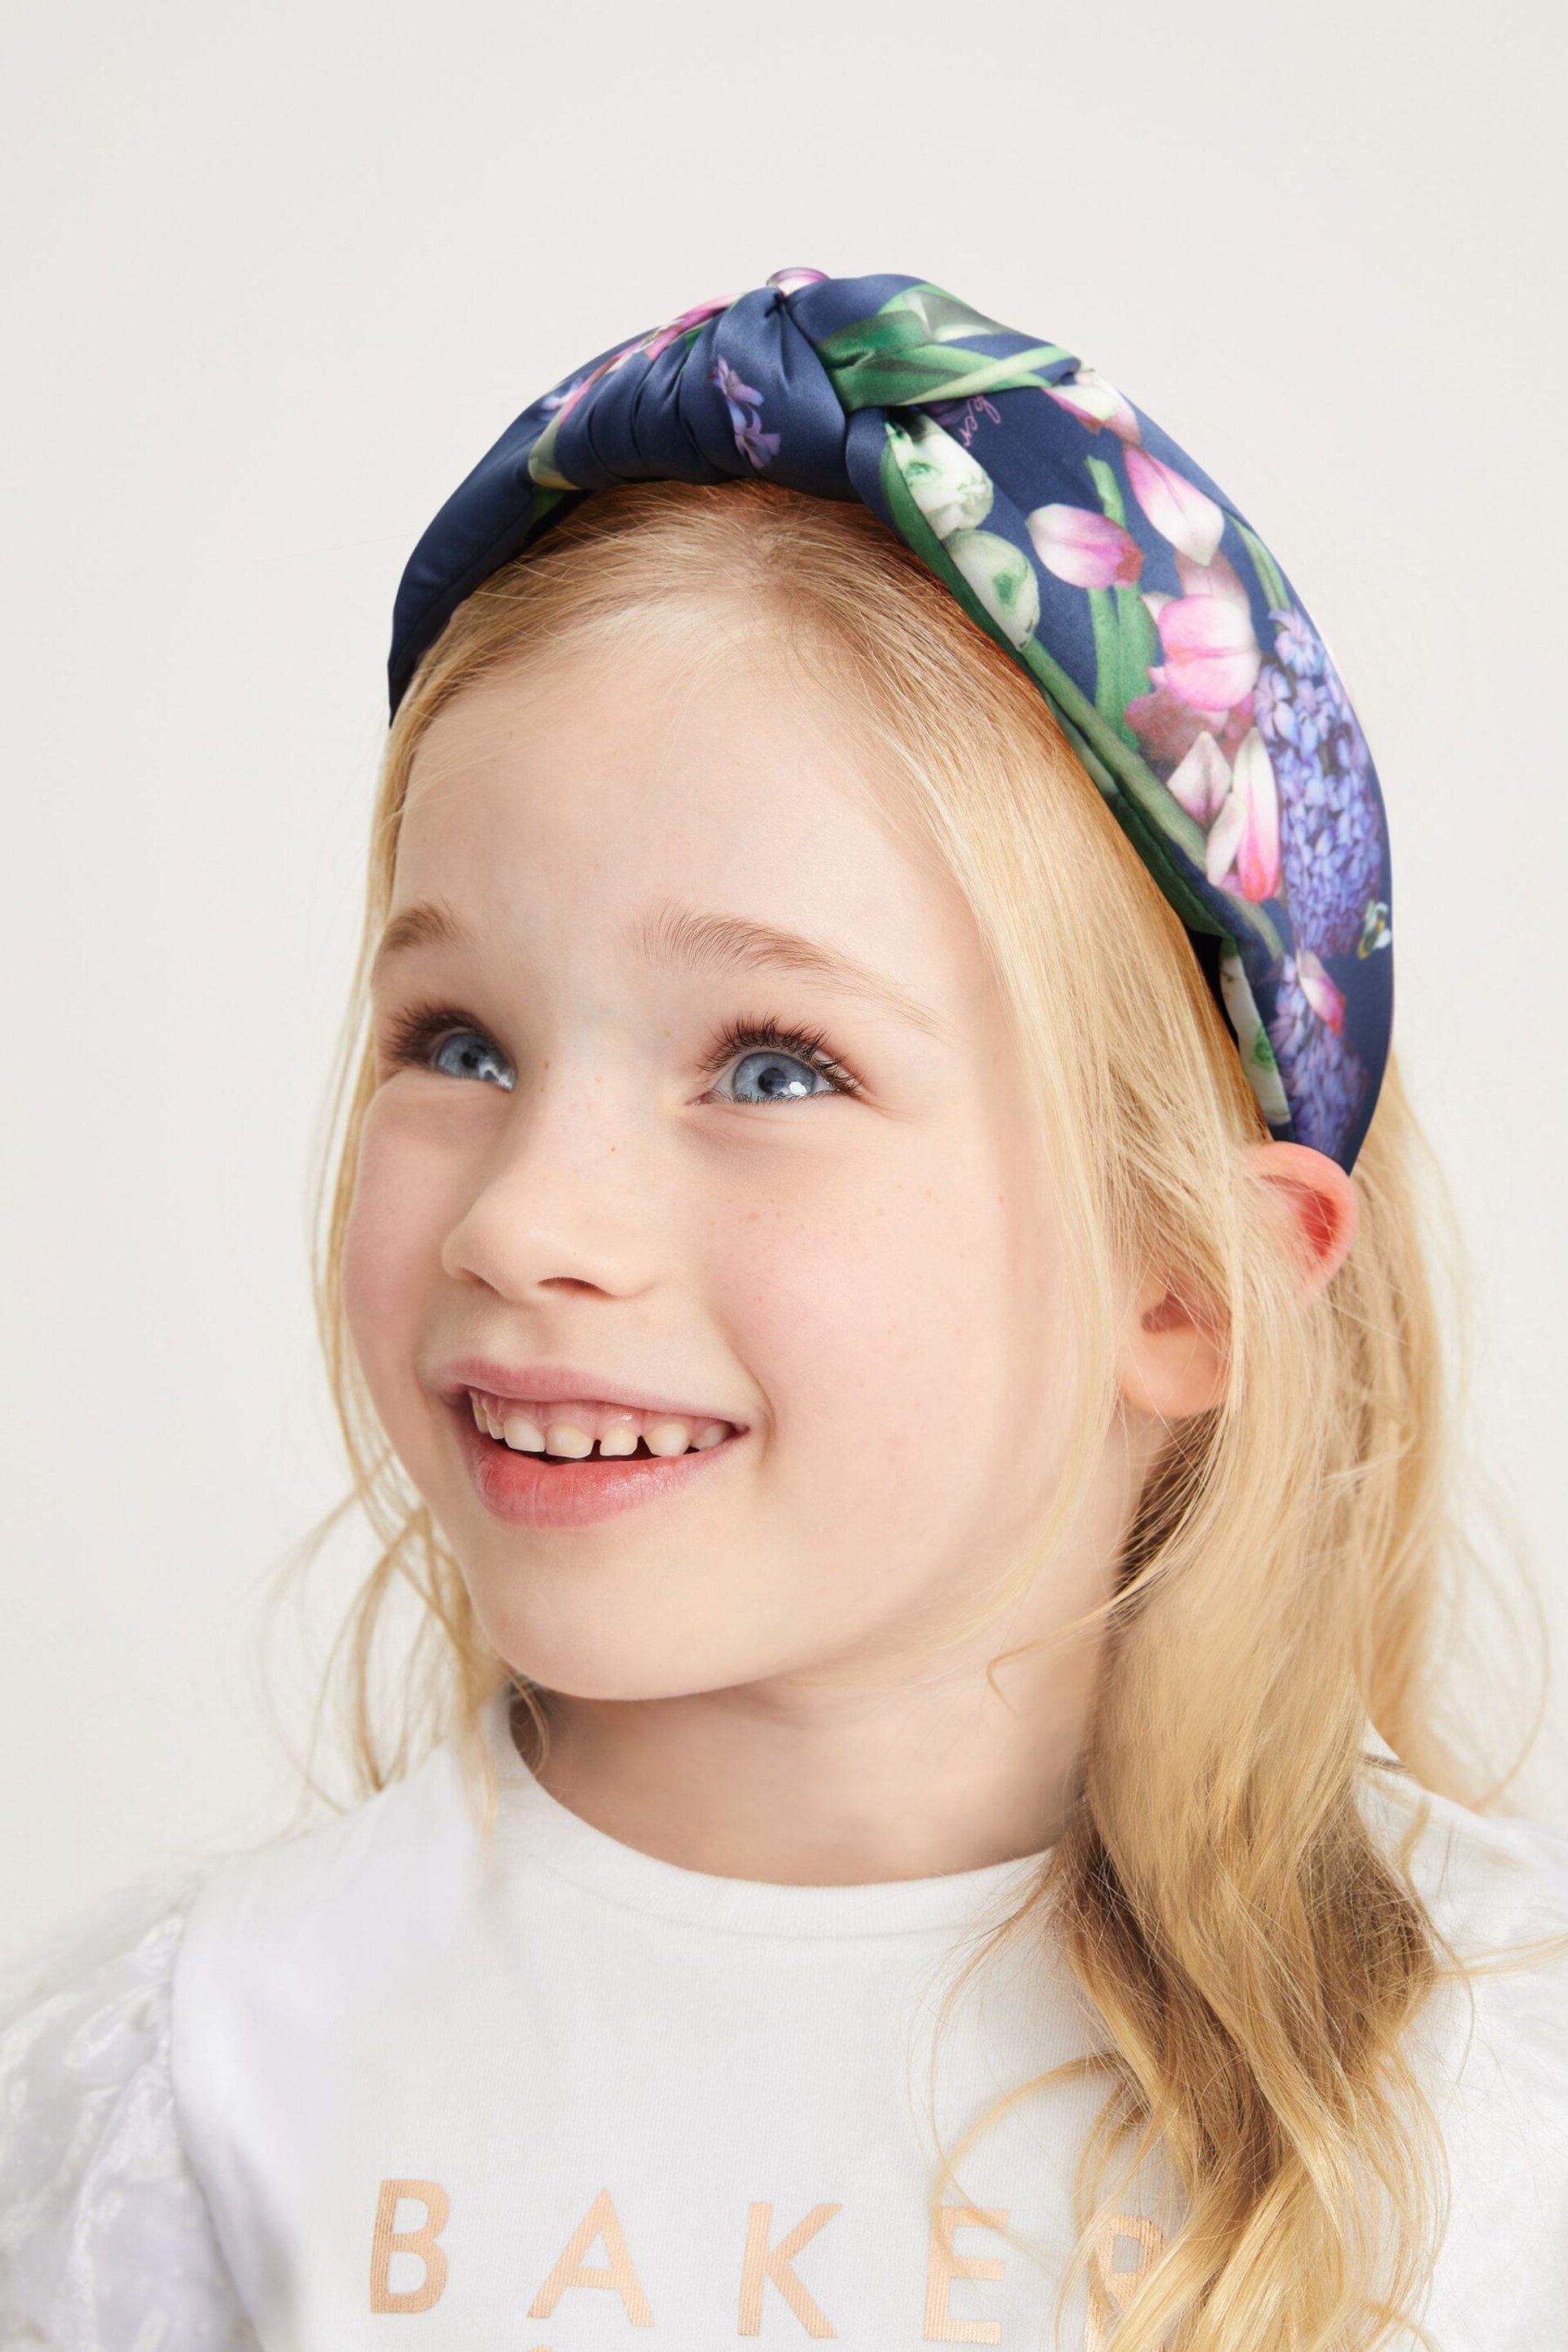 Baker by Ted Baker Girls Floral Knotted Headband - Image 1 of 6